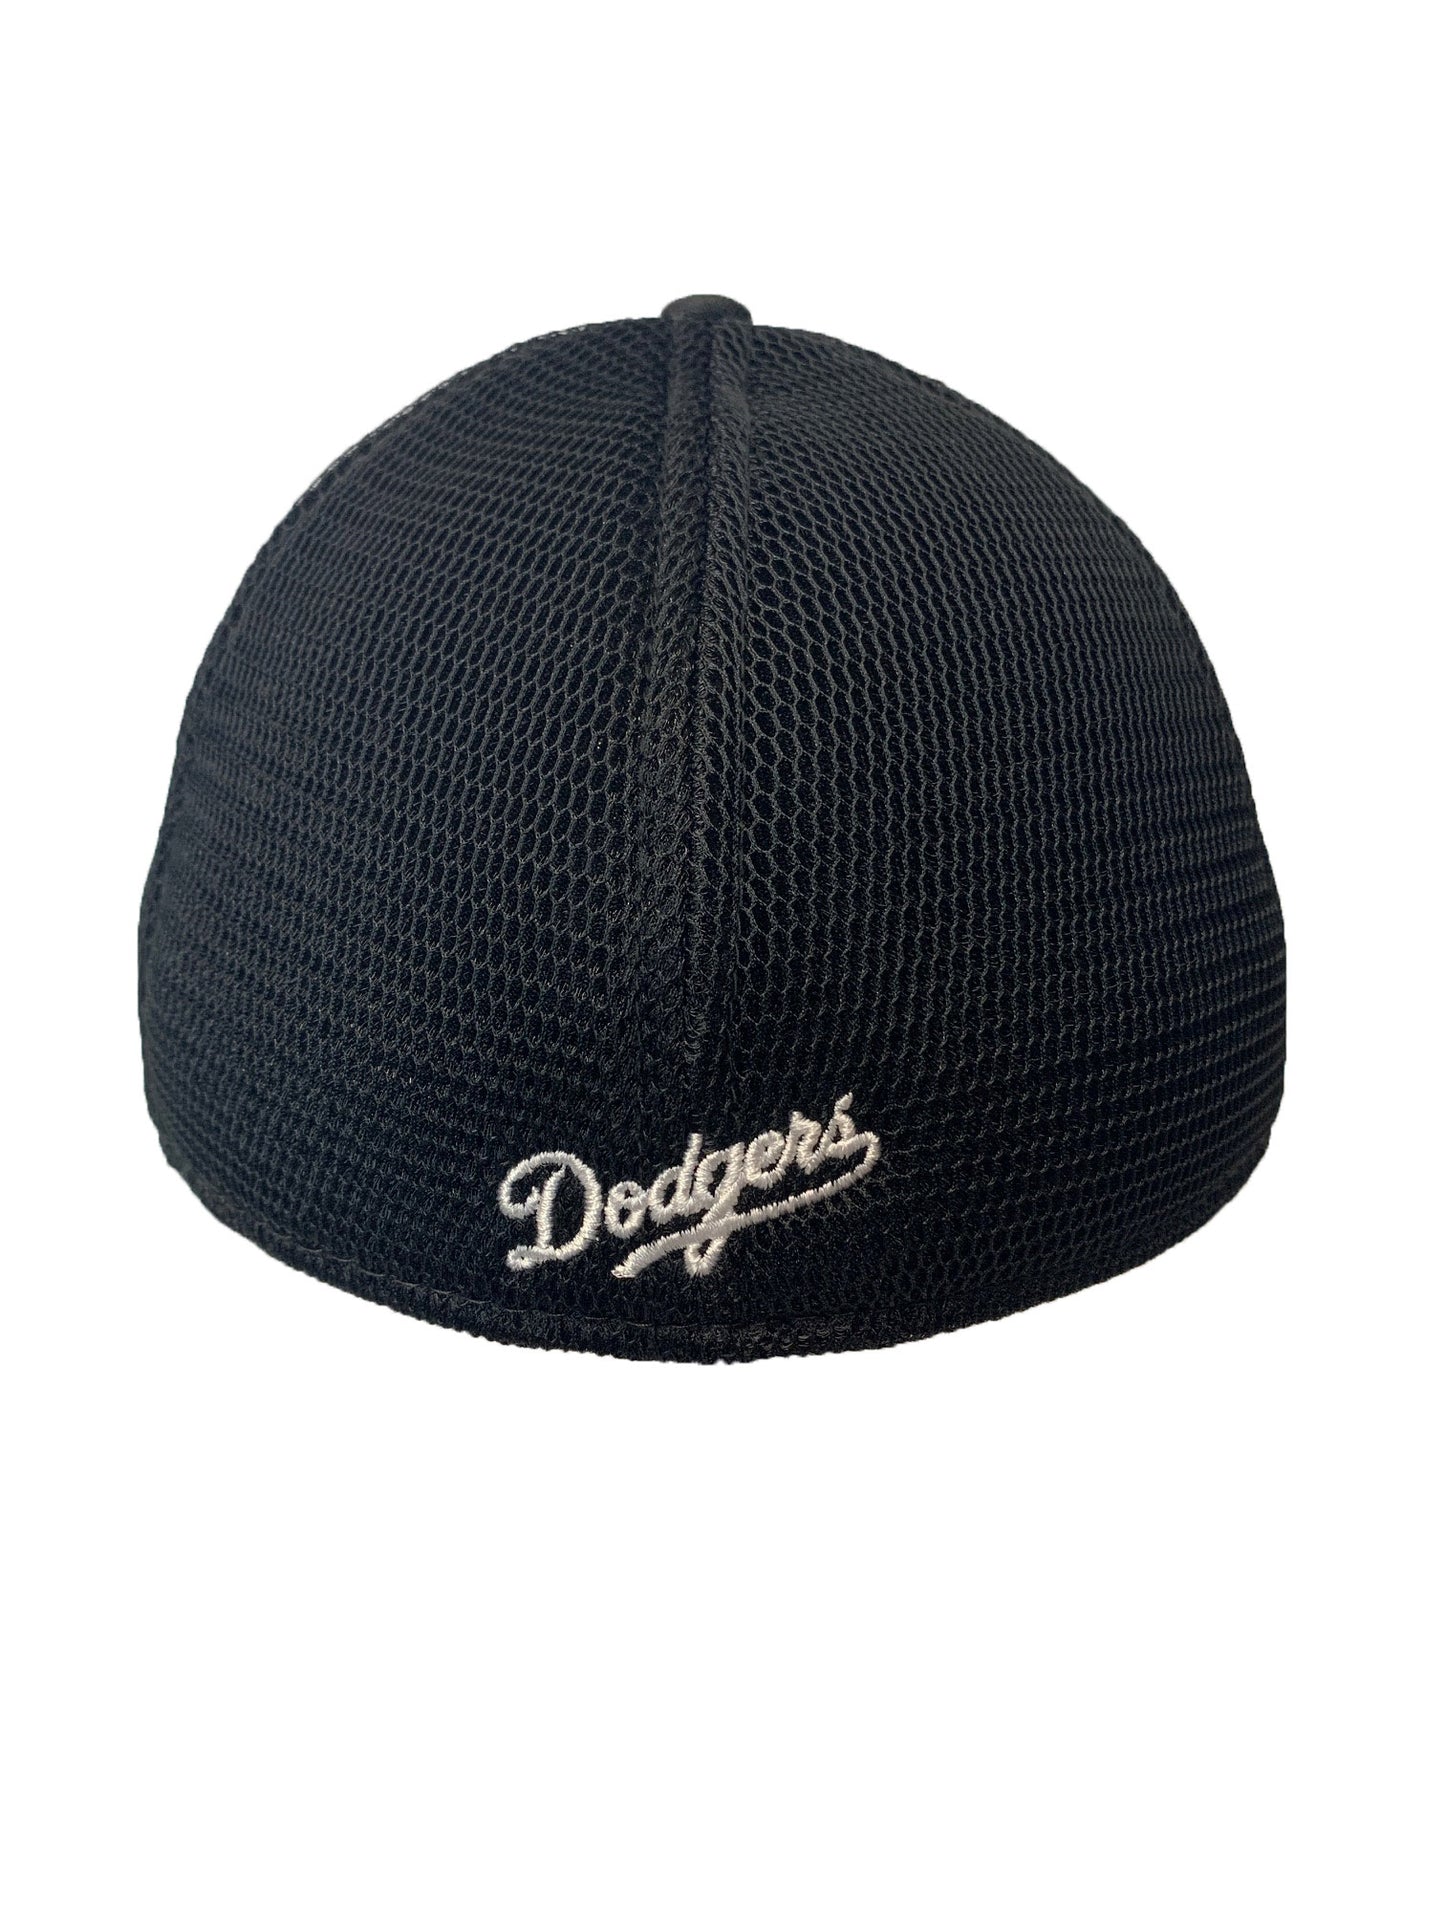 LOS ANGELES DODGERS CAMOTONE 39THIRTY